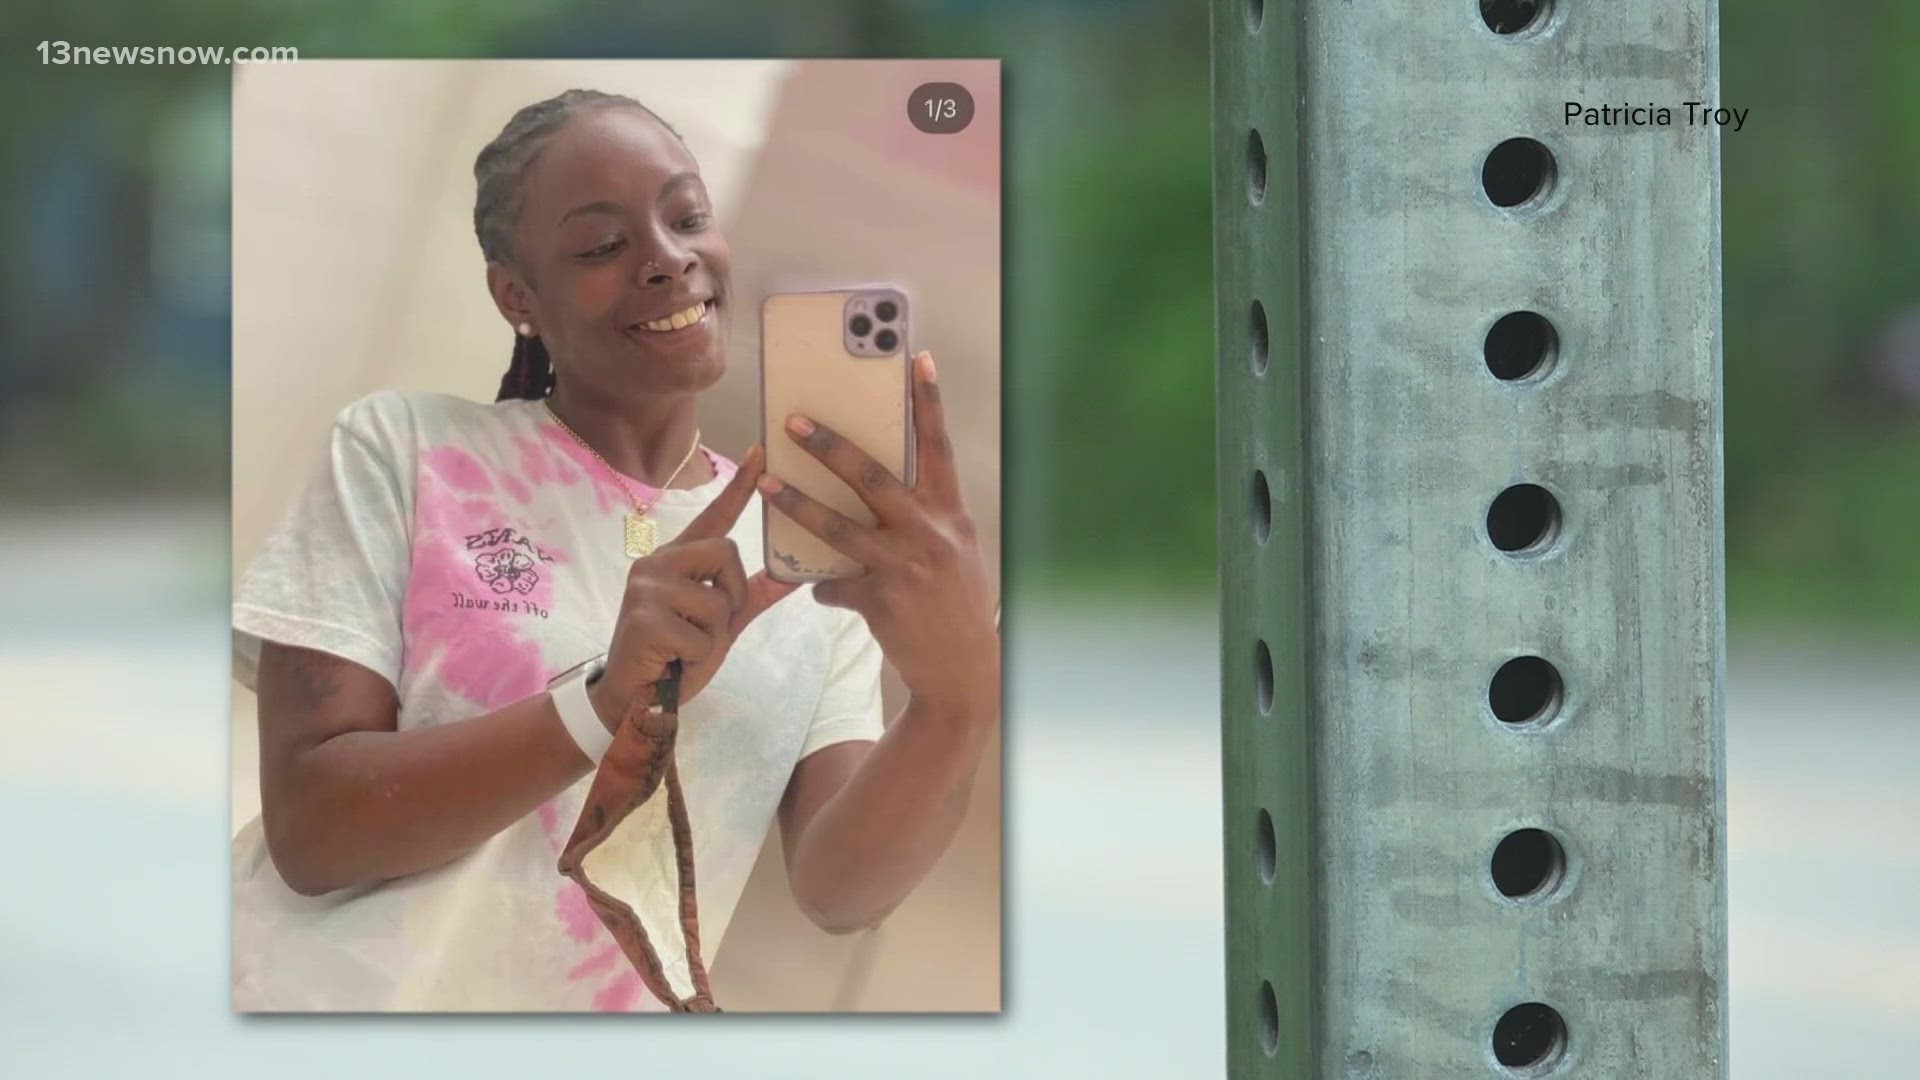 Investigators believe Ty'osha Mitchell was forcibly taken from Richmond that morning and was shot and killed at the location in York County where her body was found.